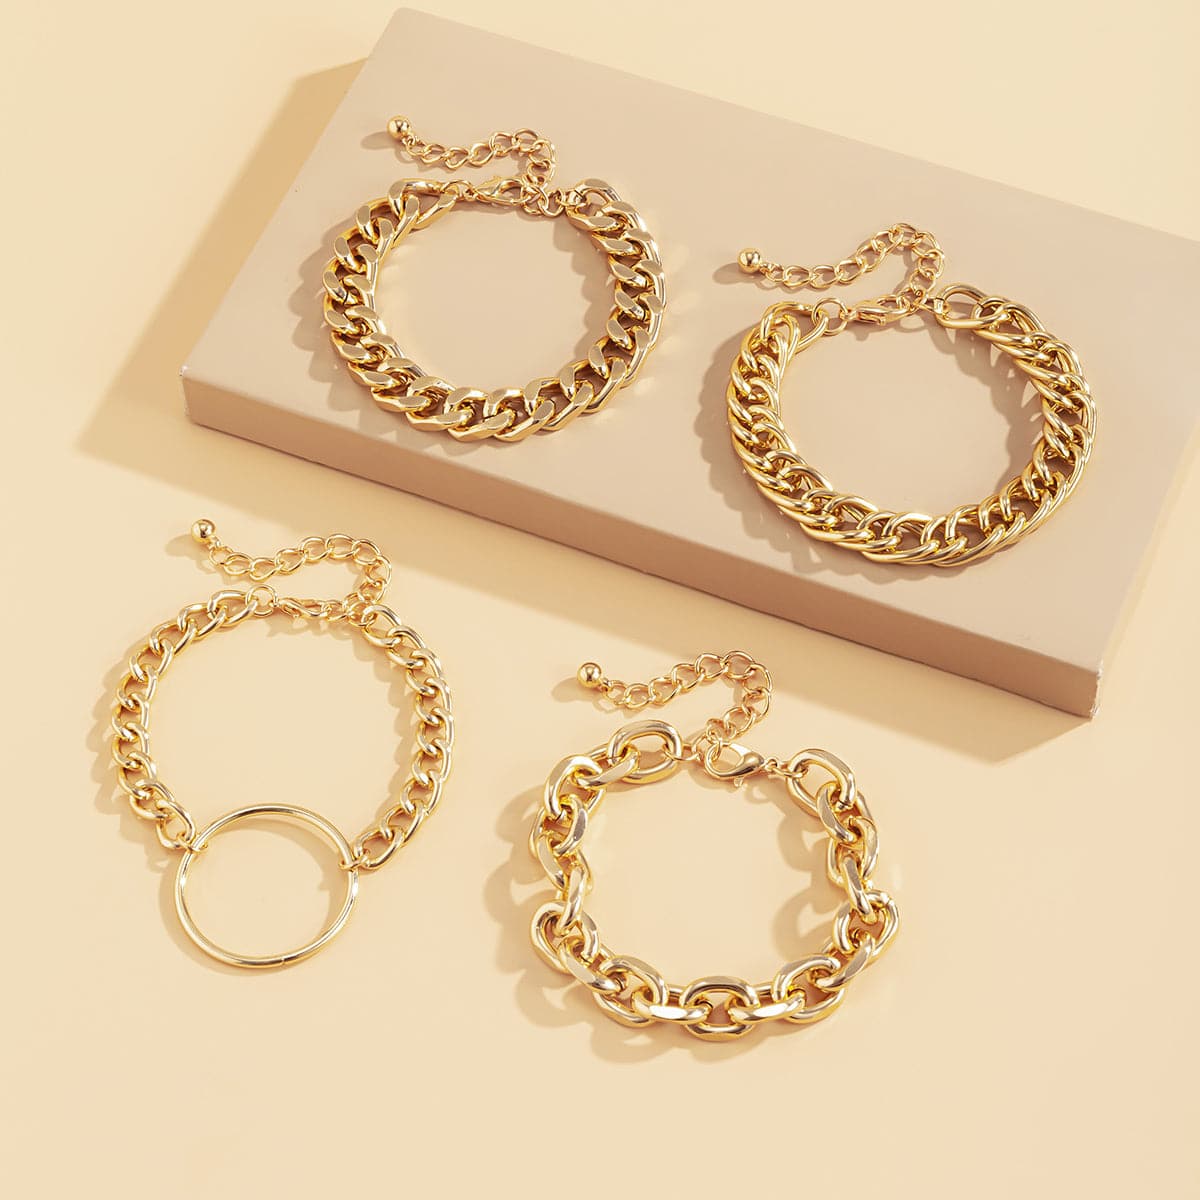 18K Gold Plated Hoop Cable Chain Bracelet Set